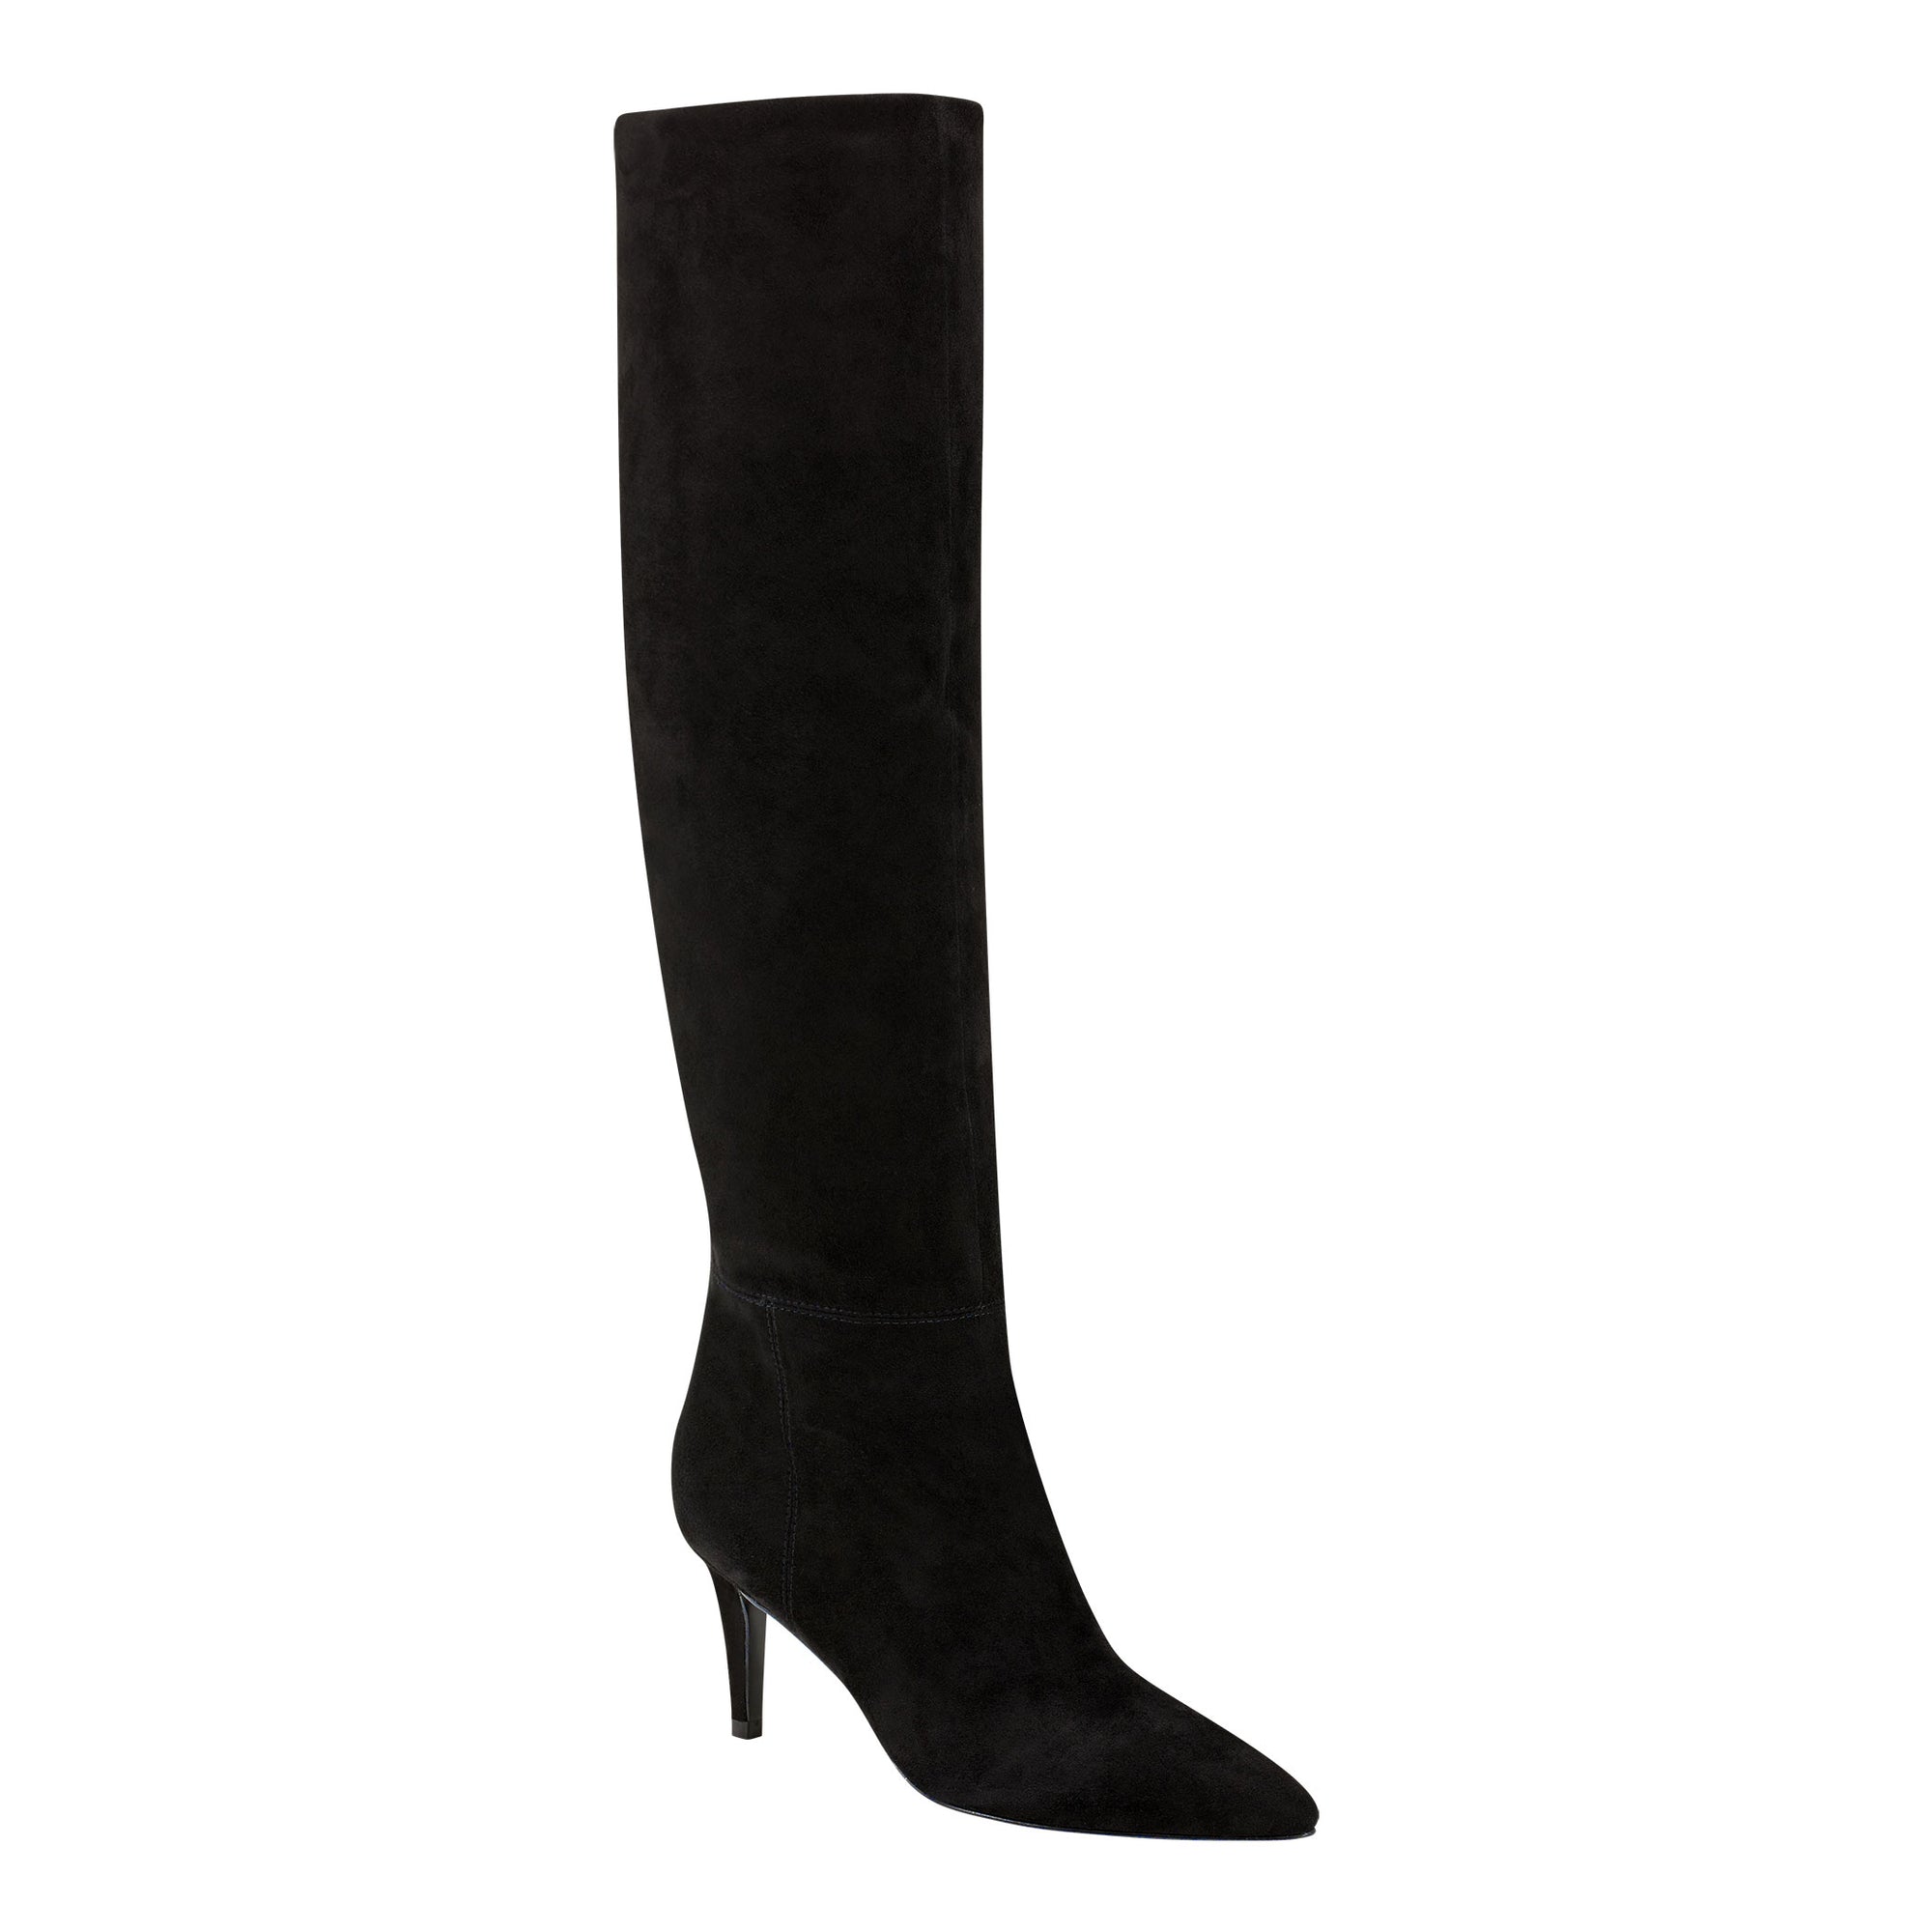 marc fisher tall suede boots